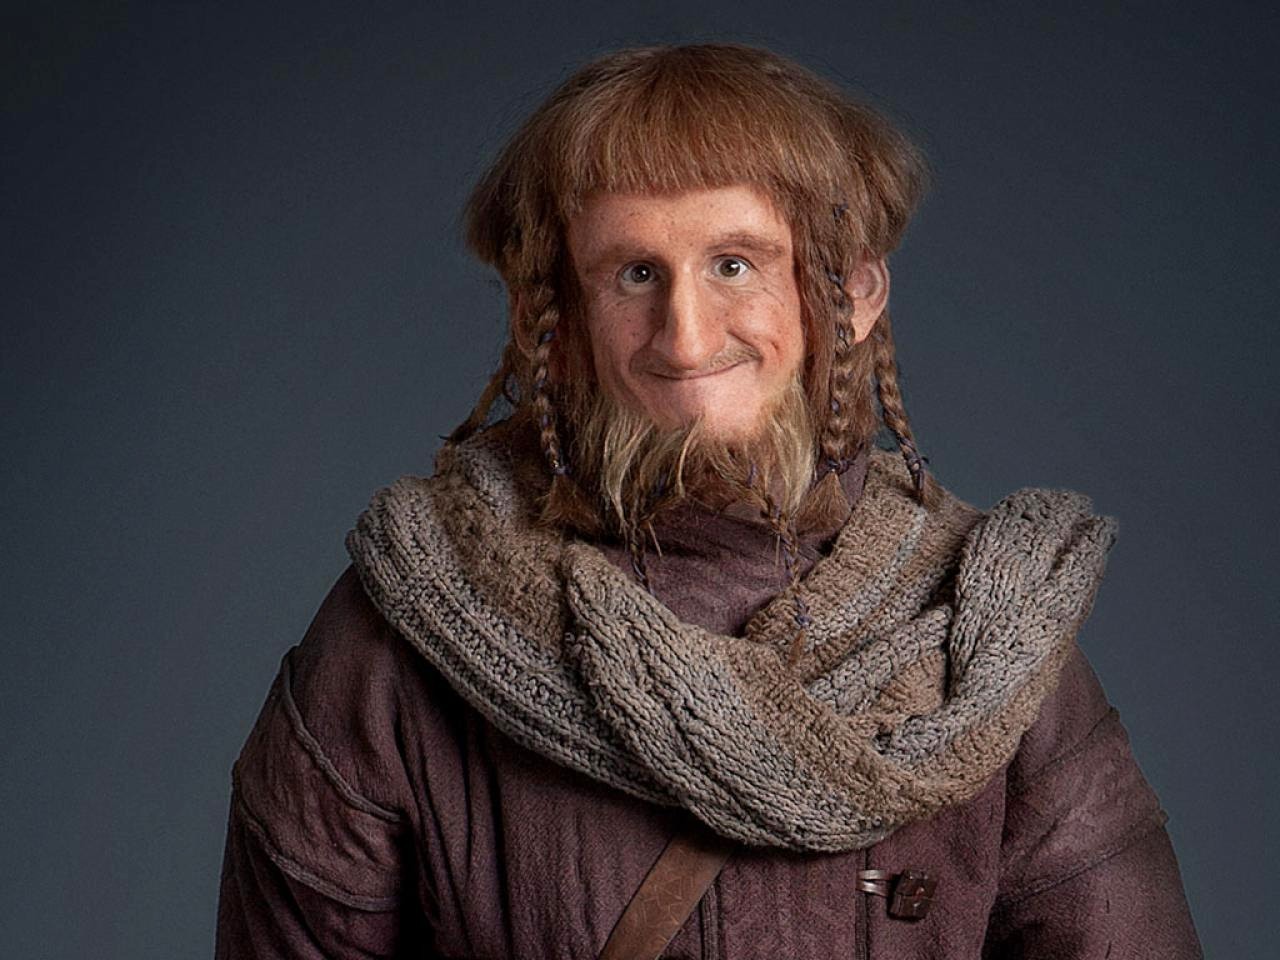 Adam Brown stars as Ori in Warner Bros. Pictures' The Hobbit: An Unexpected Journey (2012)